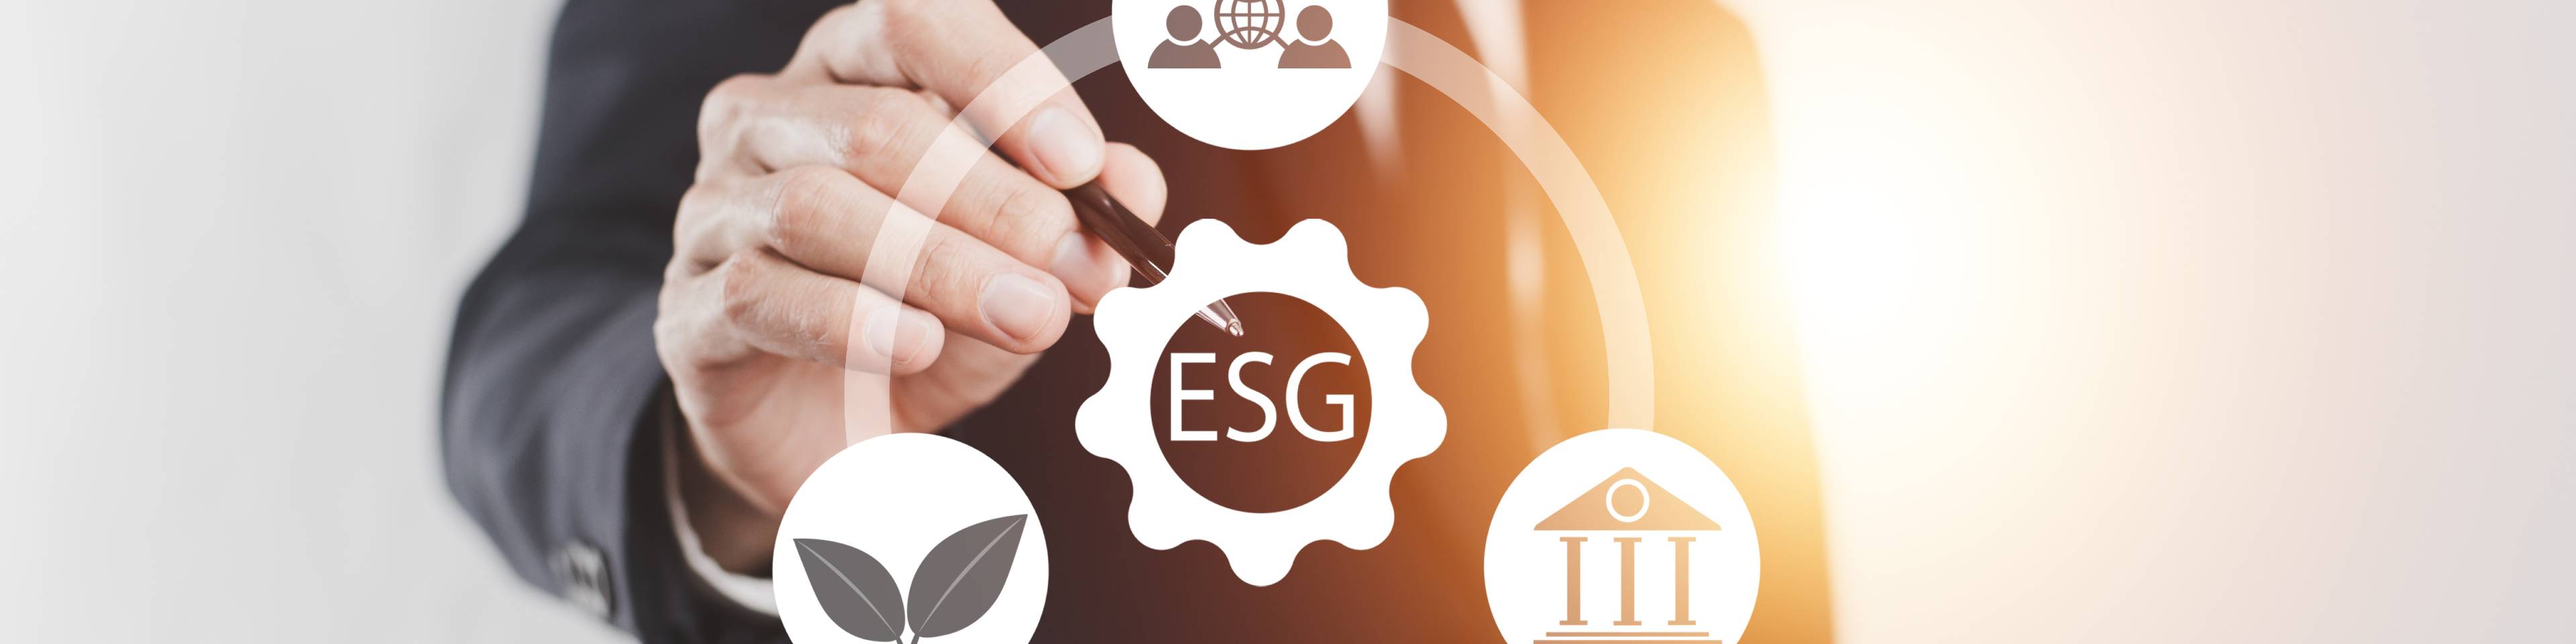 The ESG Ready Lawyer: K&L Gates Partners Sean Jones and Julie Rizzo discuss ESG issues in today’s highly politicized environment and challenges they create for companies across the board